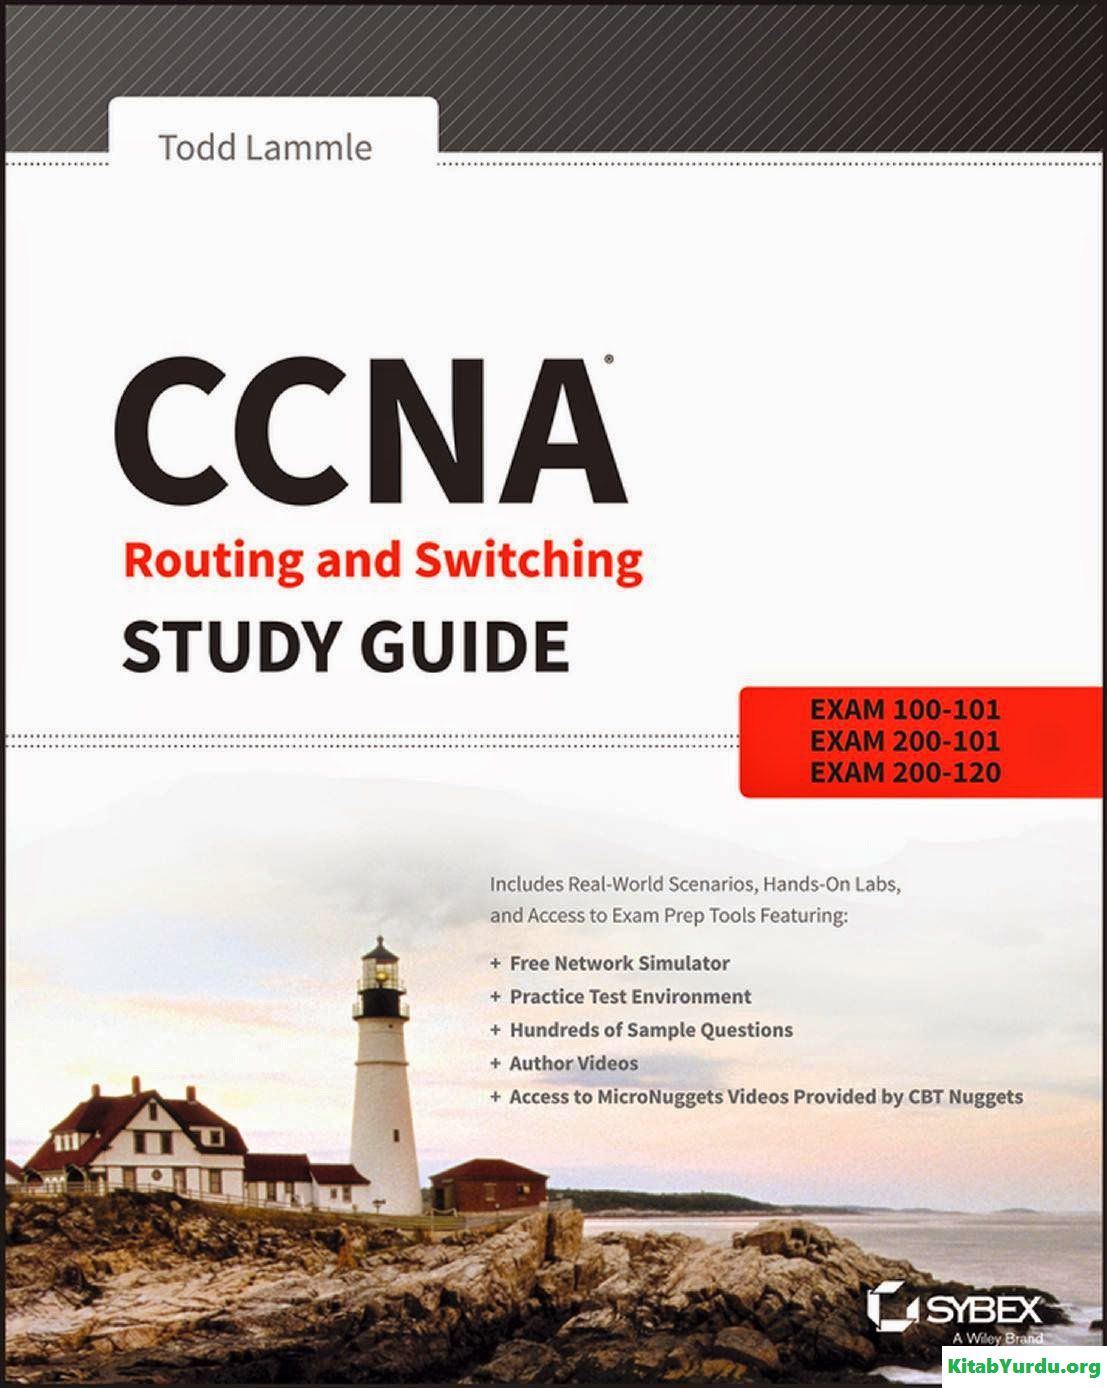 CCNA Routing and Switching study guide